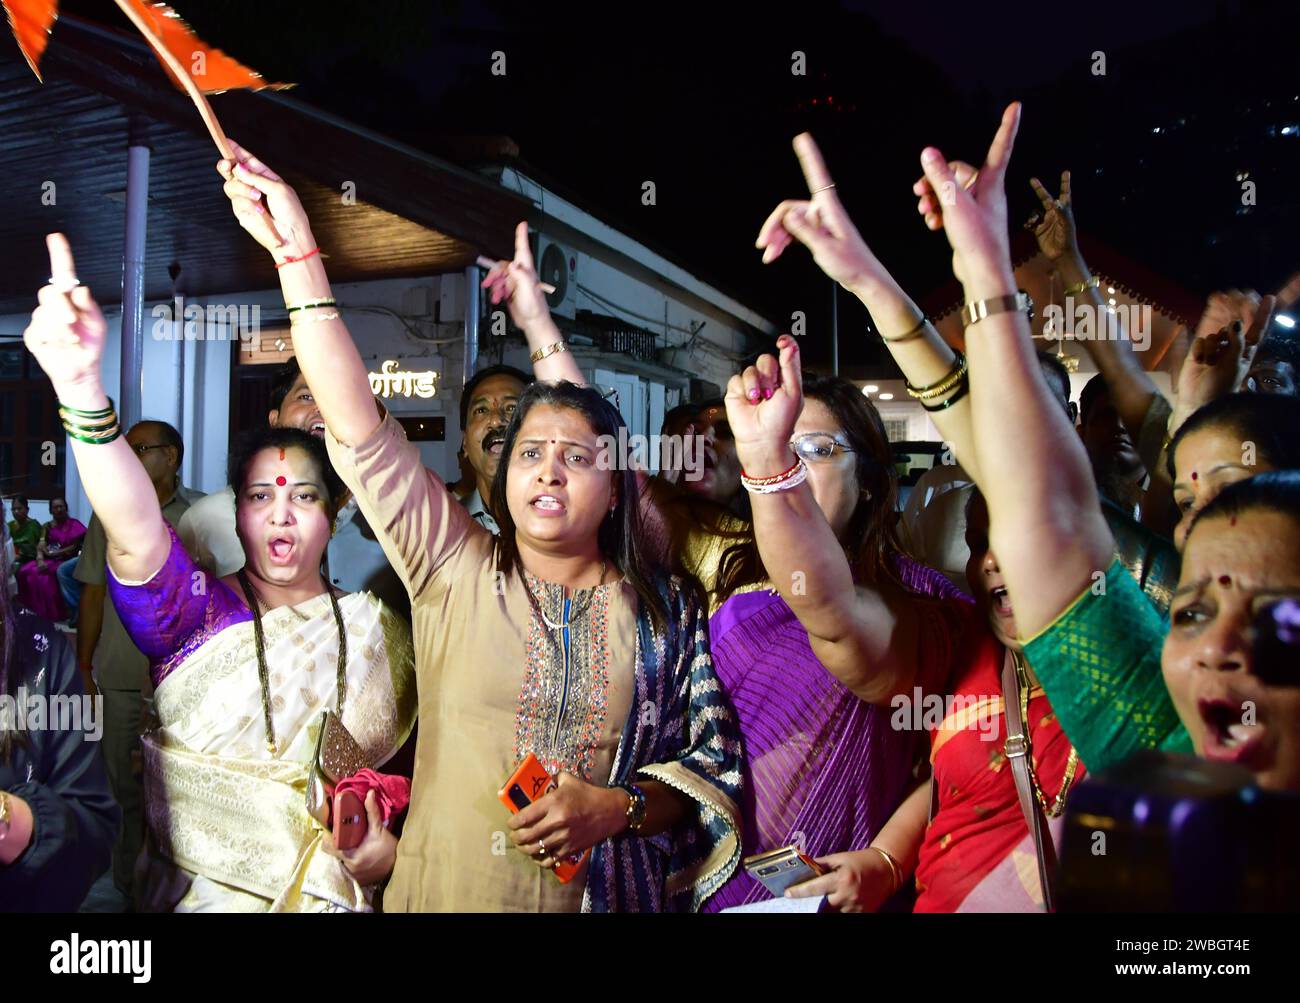 MUMBAI, INDIA - JANUARY 10: Shiv Sena (Shinde faction) workers celebrate after the verdict in the MLA disqualification case came in the favour, at Balasaheb Bhavan on January 10, 2024 in Mumbai, India. The Maharashtra Legislative Assembly Speaker Rahul Narwekar today held that Eknath Shinde led faction was the real Shiv Sena when the rival faction emerged within the party on June 22, 2022. He has refused to disqualify any member from both the factions, led by Shinde and Uddhav Thackeray. Both the factions had filed 34 petitions against each other before the speaker in 2022, seeking the disqu Stock Photo